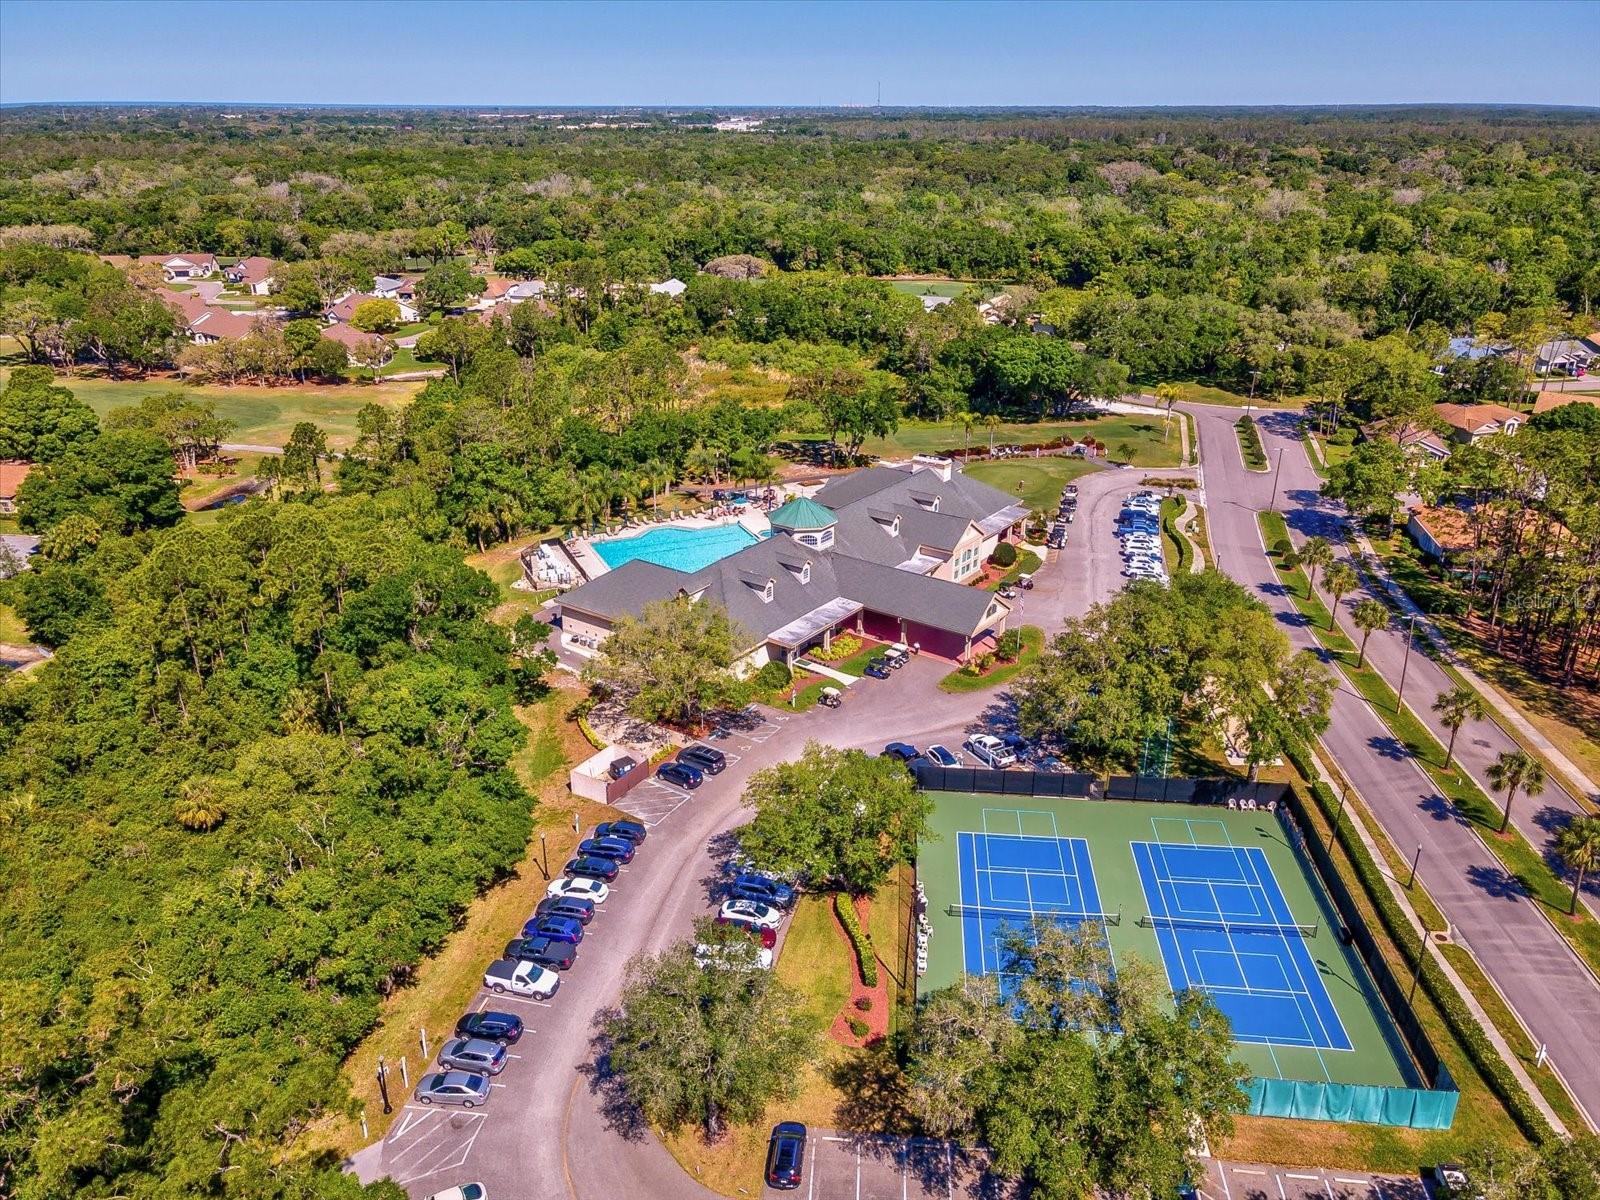 Drone view of Timber Greens rec facilities